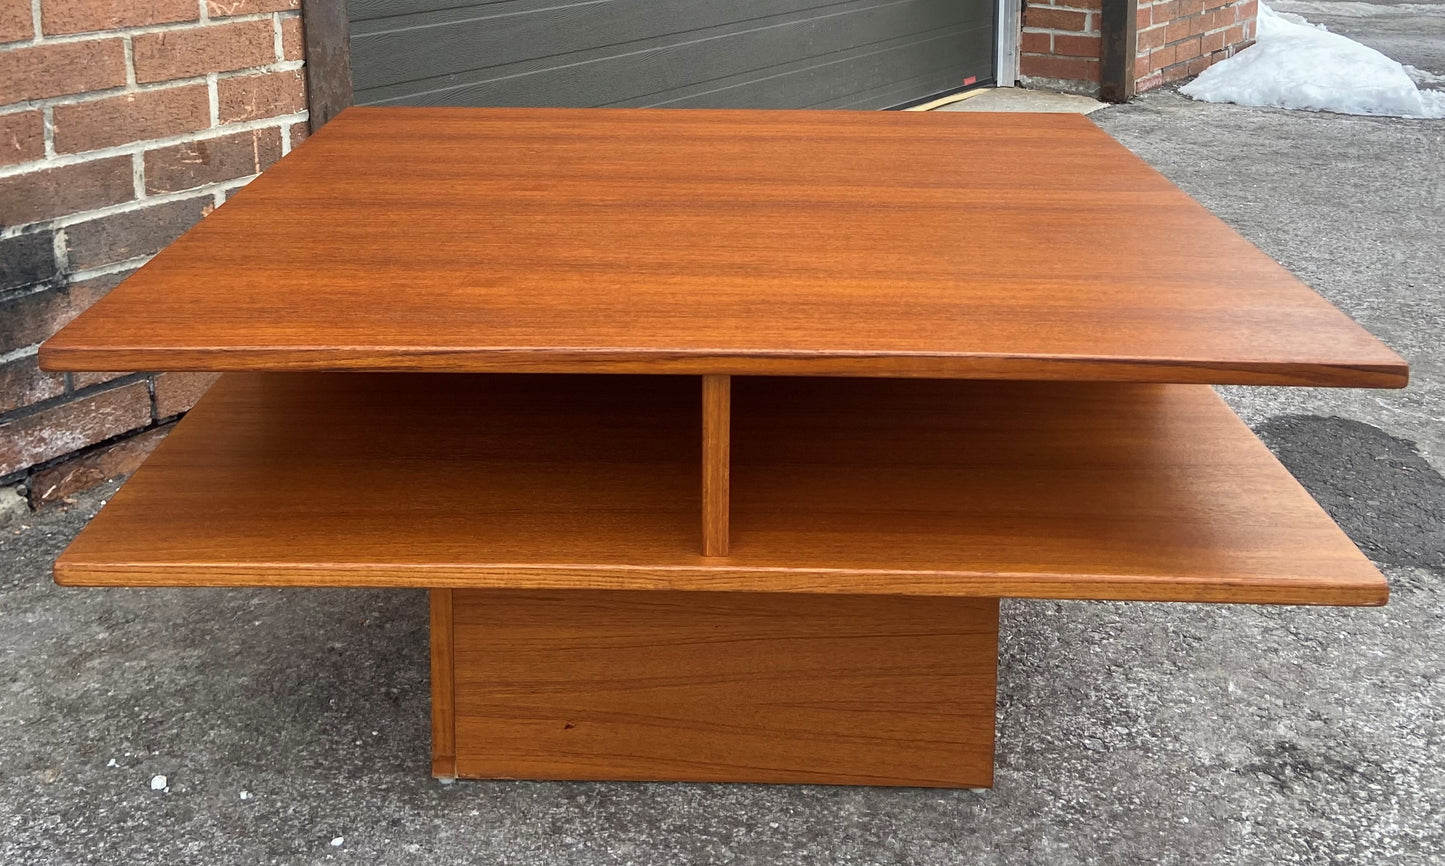 REFINISHED Mid Century Modern Teak Coffee Table Square 2 Tier, Perfect